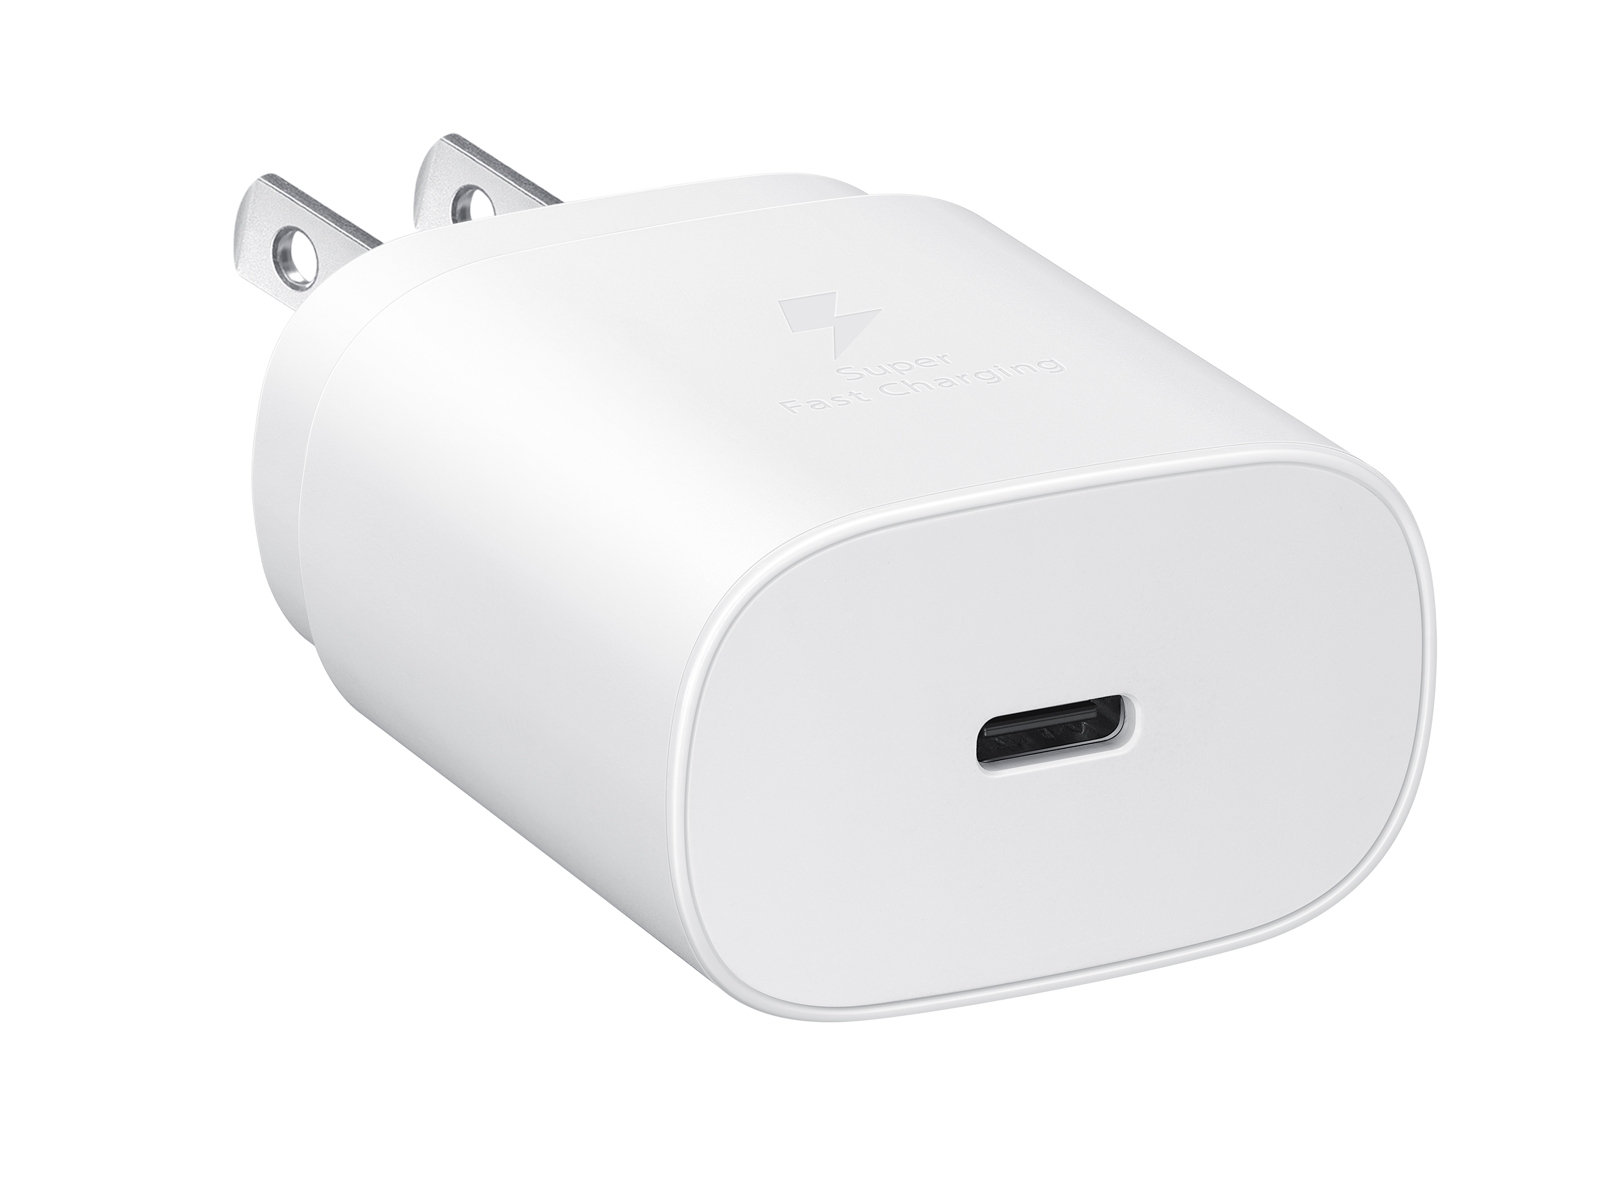 25W USB-C Fast Charging Wall Charger, White Mobile Accessories -  EP-TA800XWEGUS